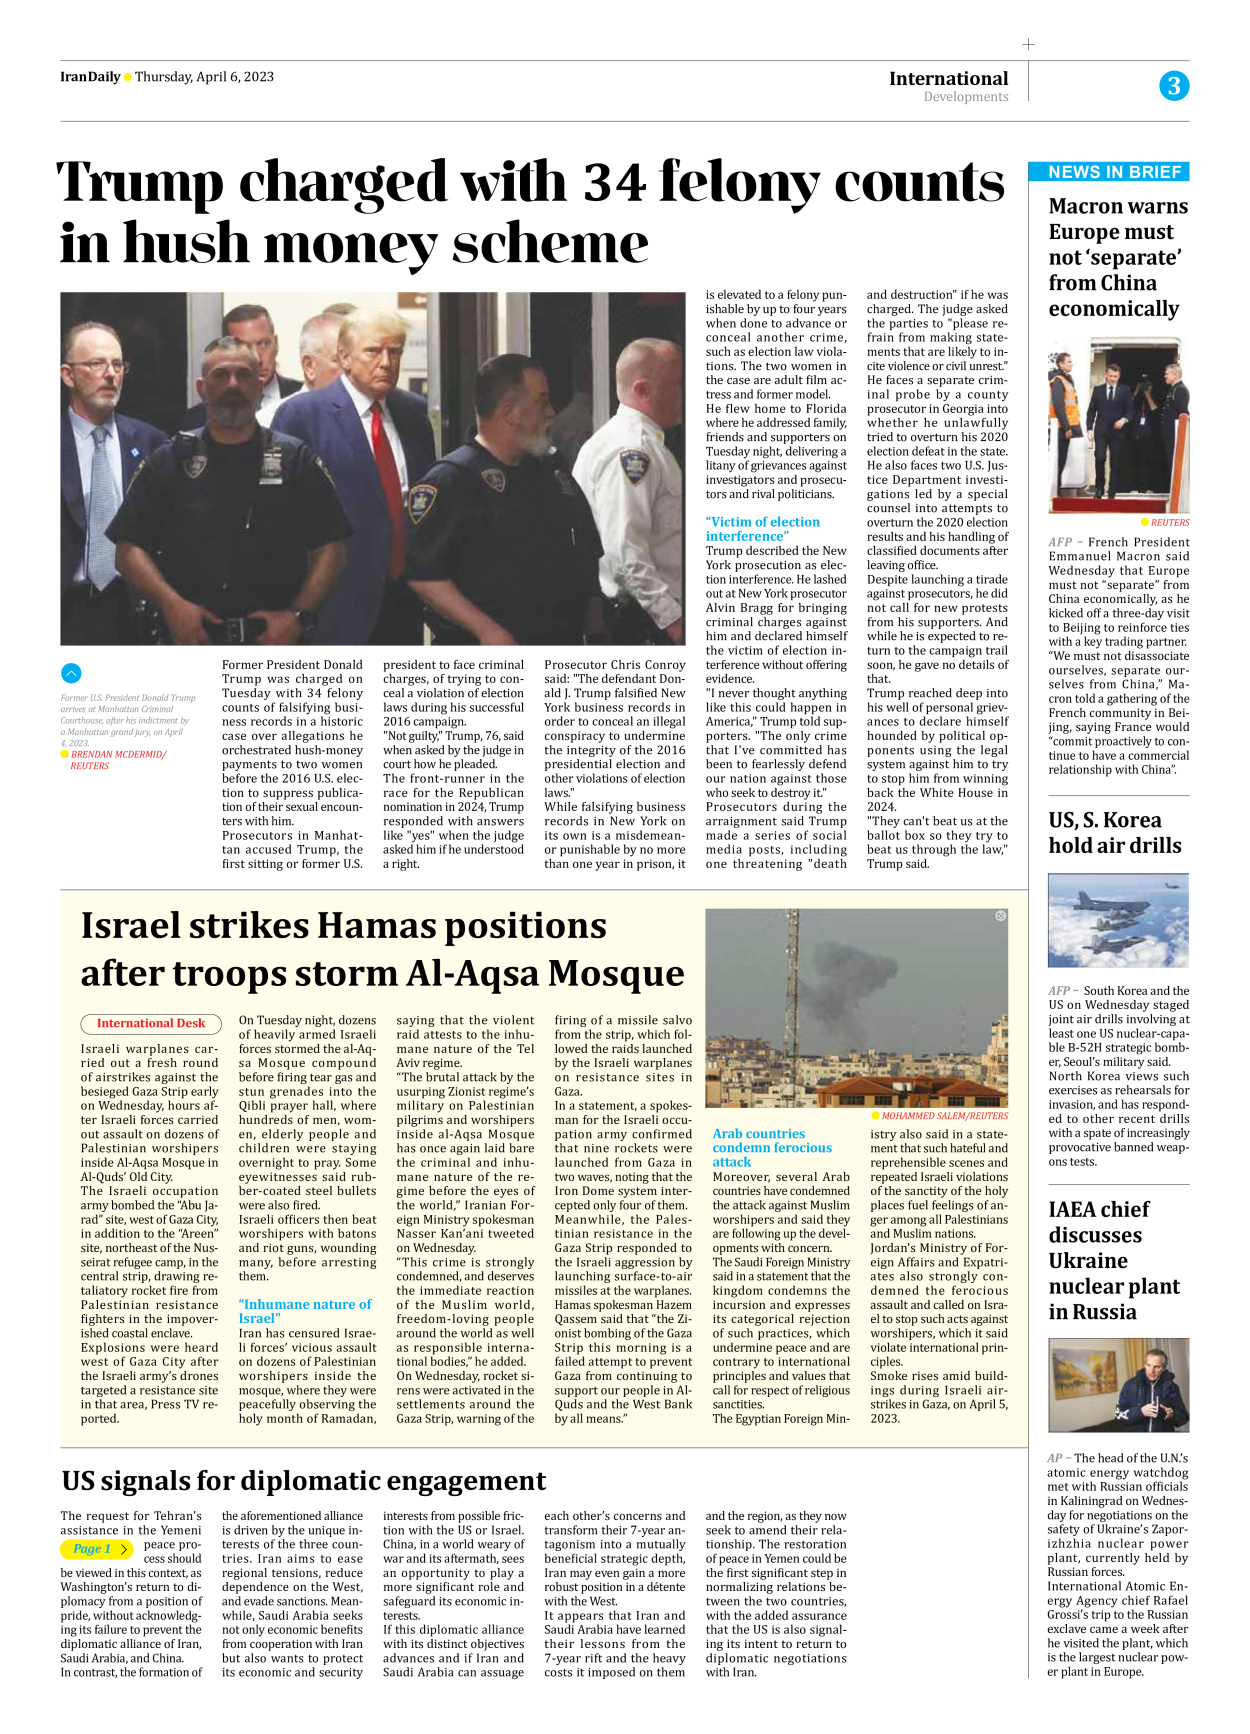 Iran Daily - Number Seven Thousand Two Hundred and Sixty Three - 06 April 2023 - Page 3